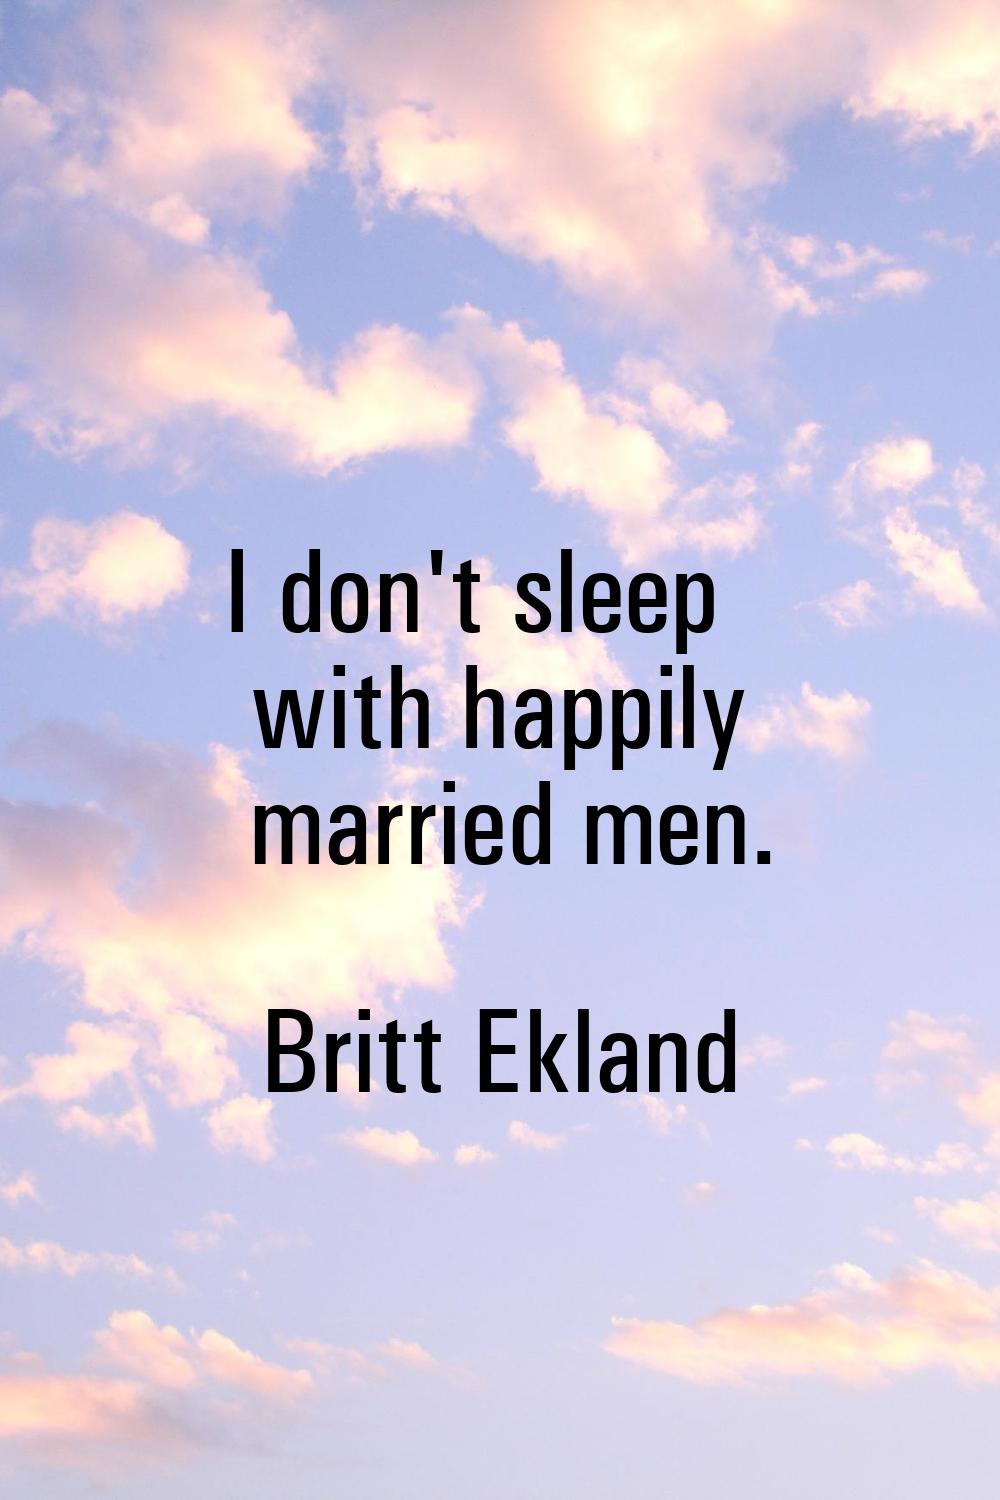 I don't sleep with happily married men.